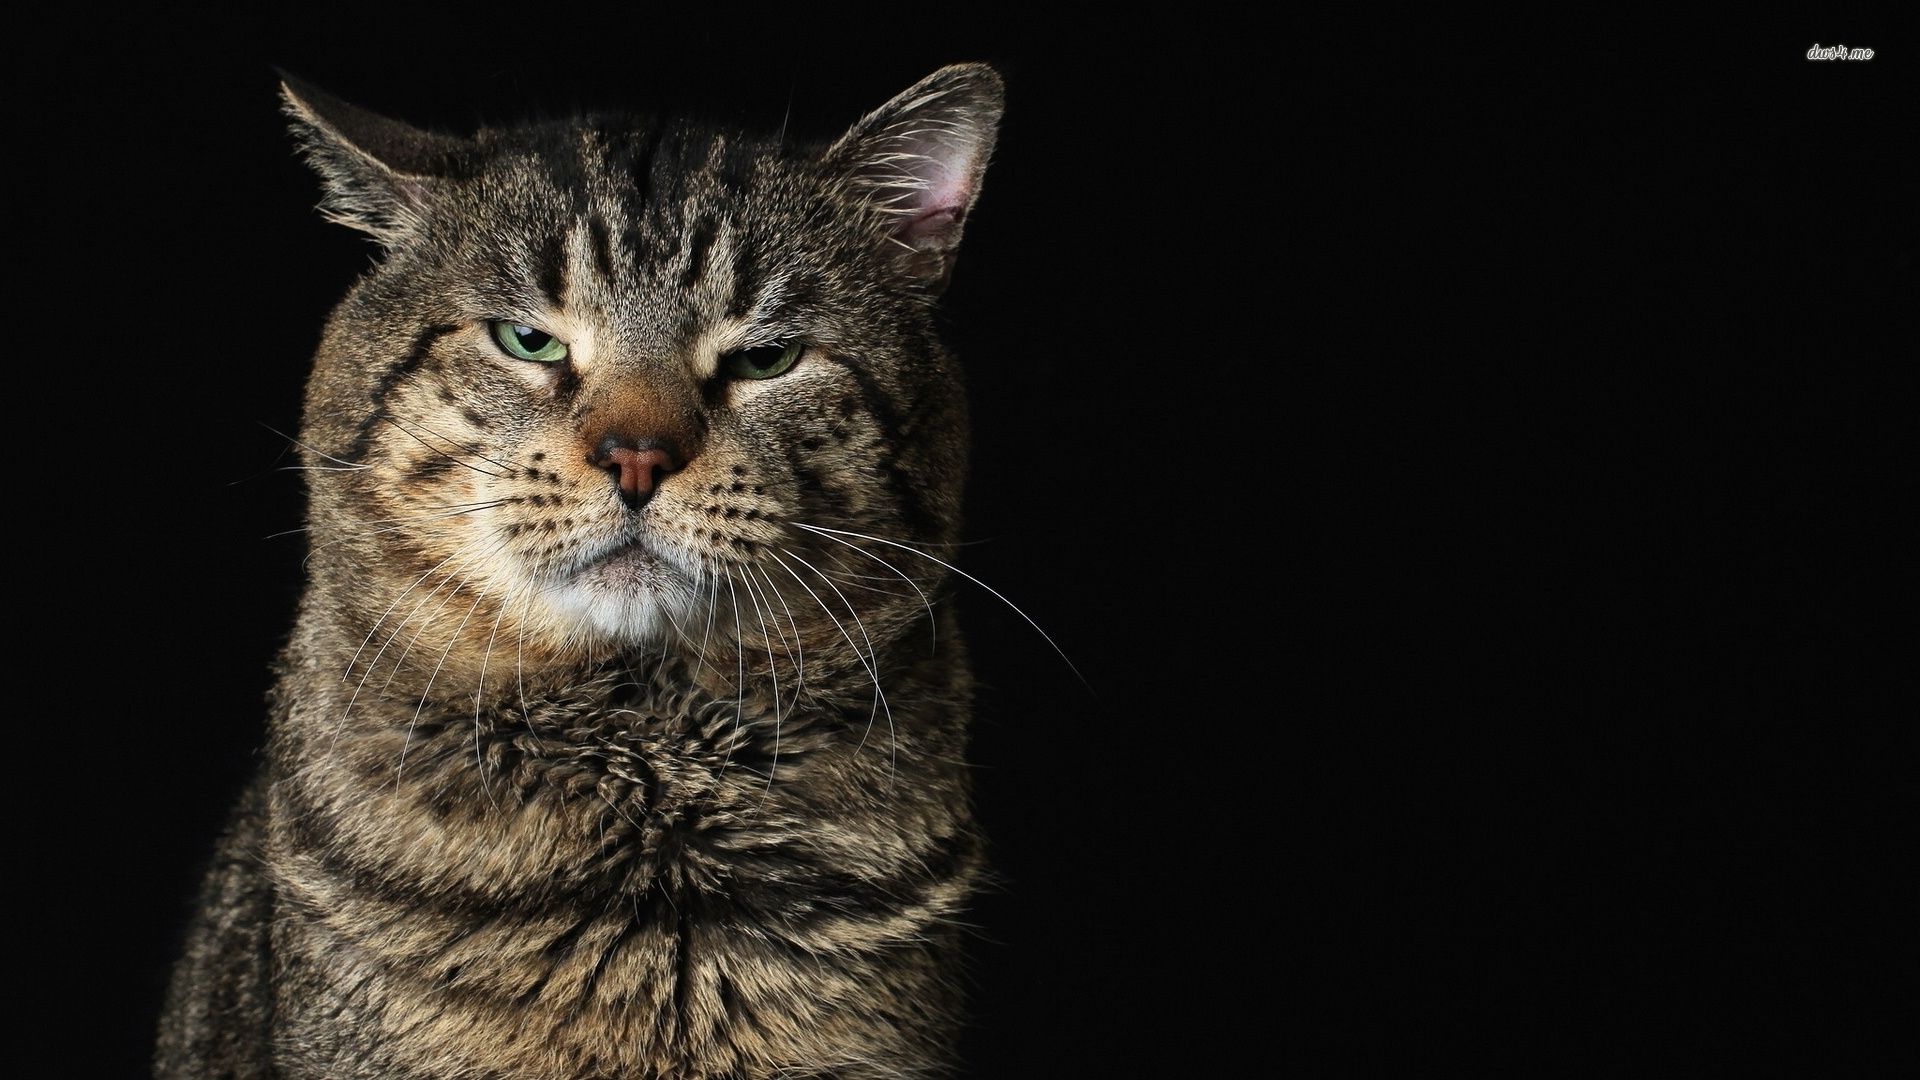 Angry cat wallpaper - Animal wallpapers - #32860